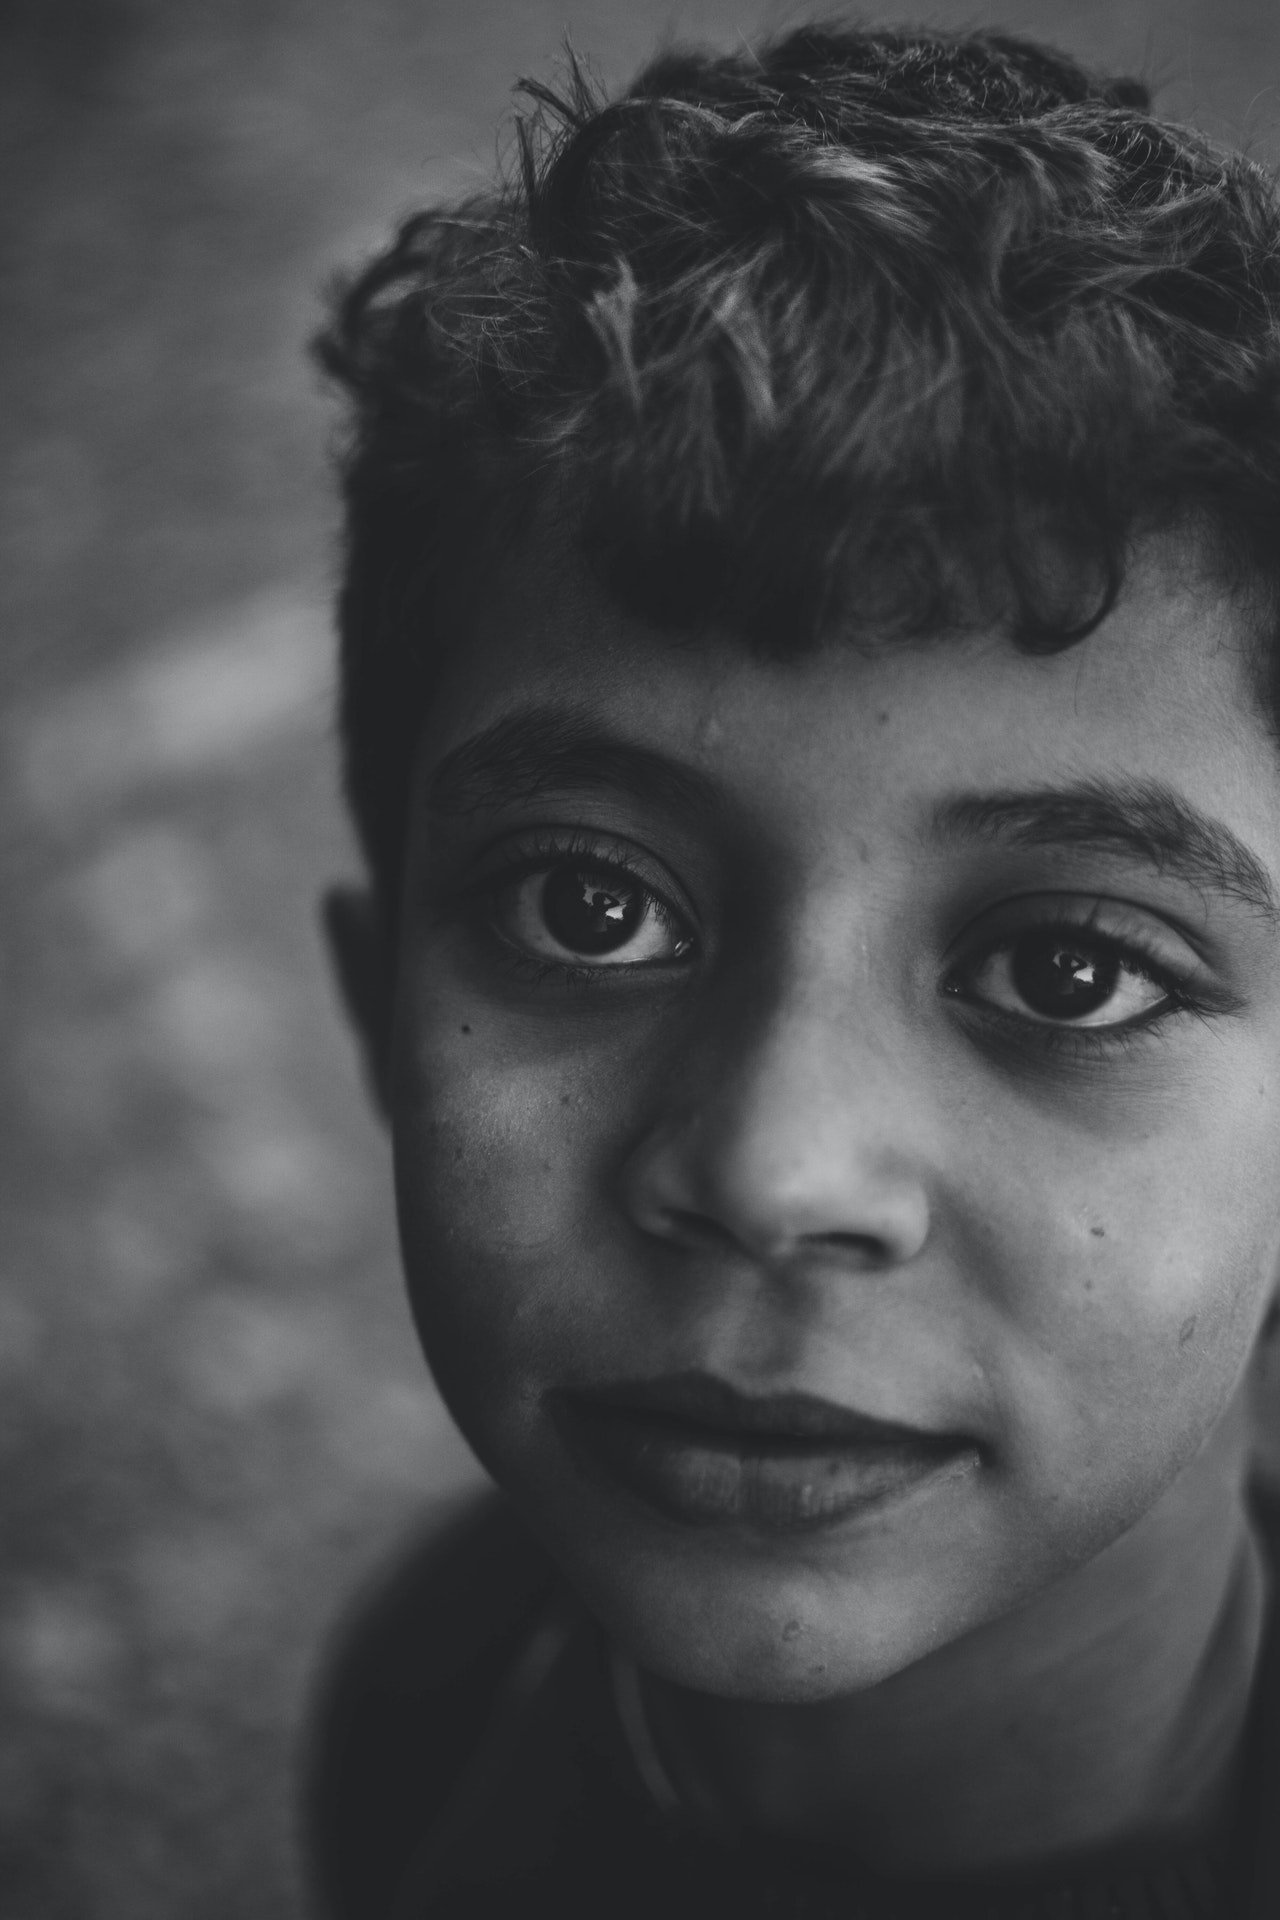 The boy explained why he came into the house. | Source: Pexels